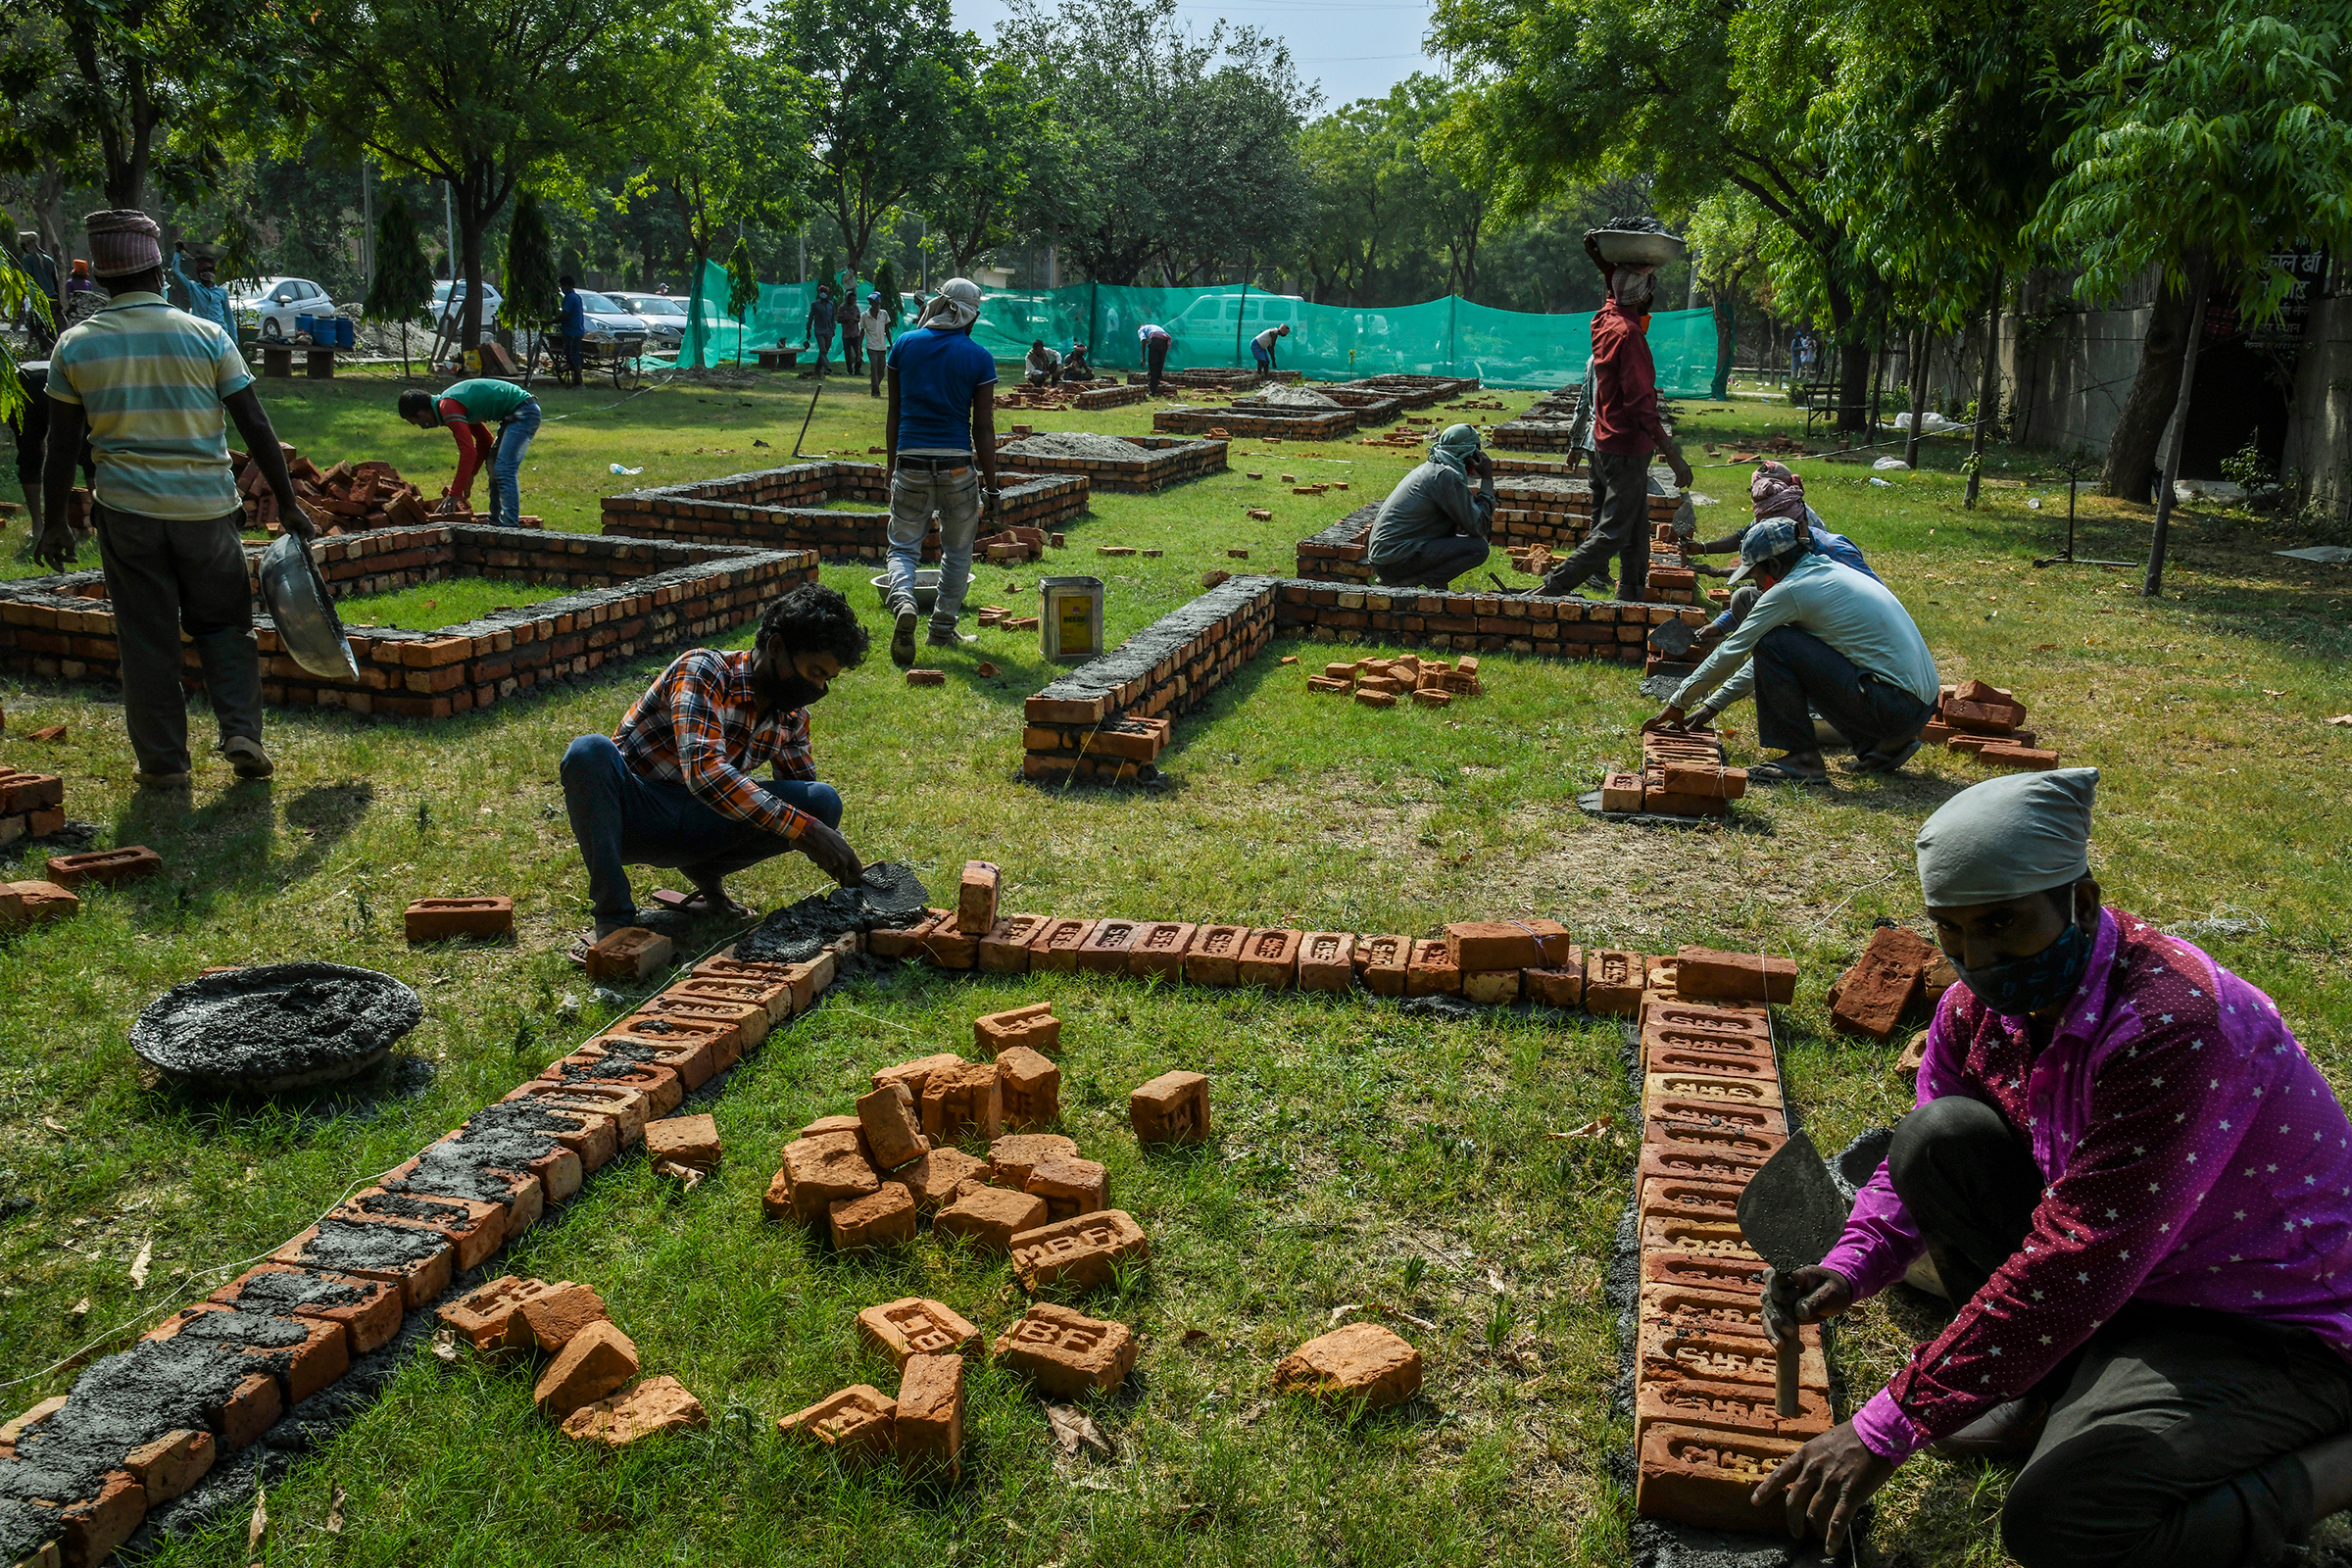 Workers build new platforms to expand a mass cremation site in New Delhi on April 27.